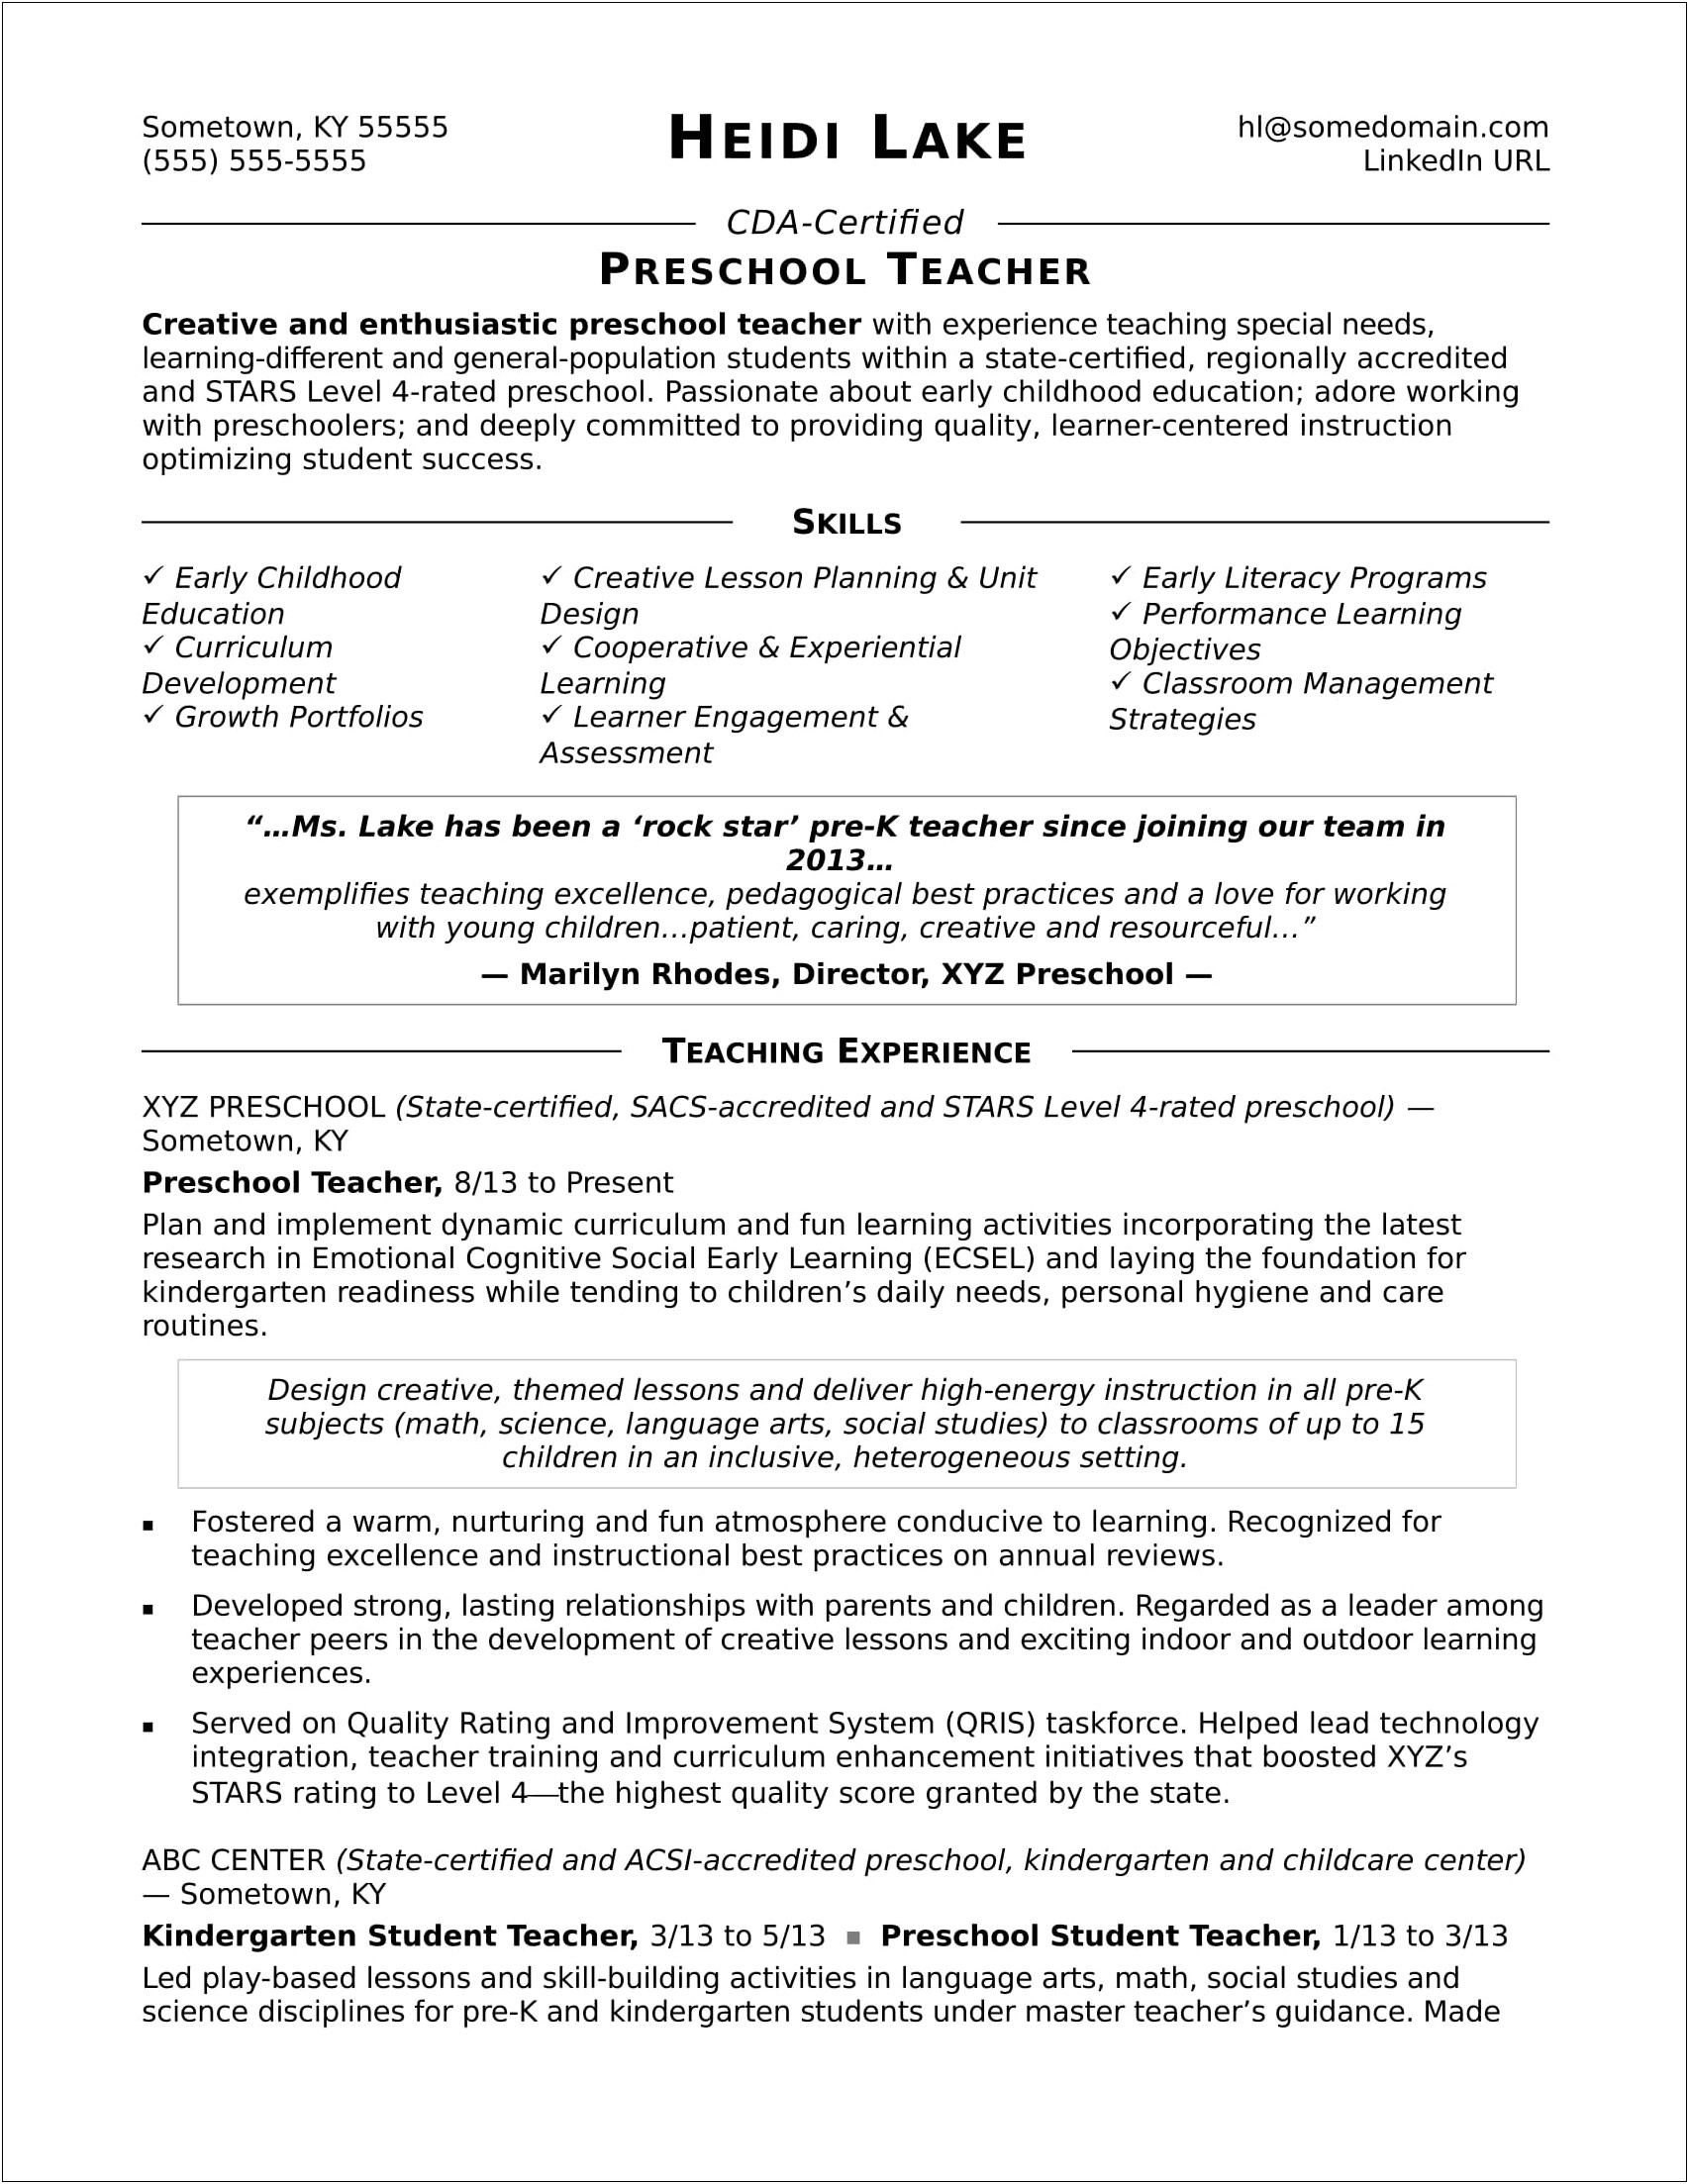 Resume Description And Skill Work With Children